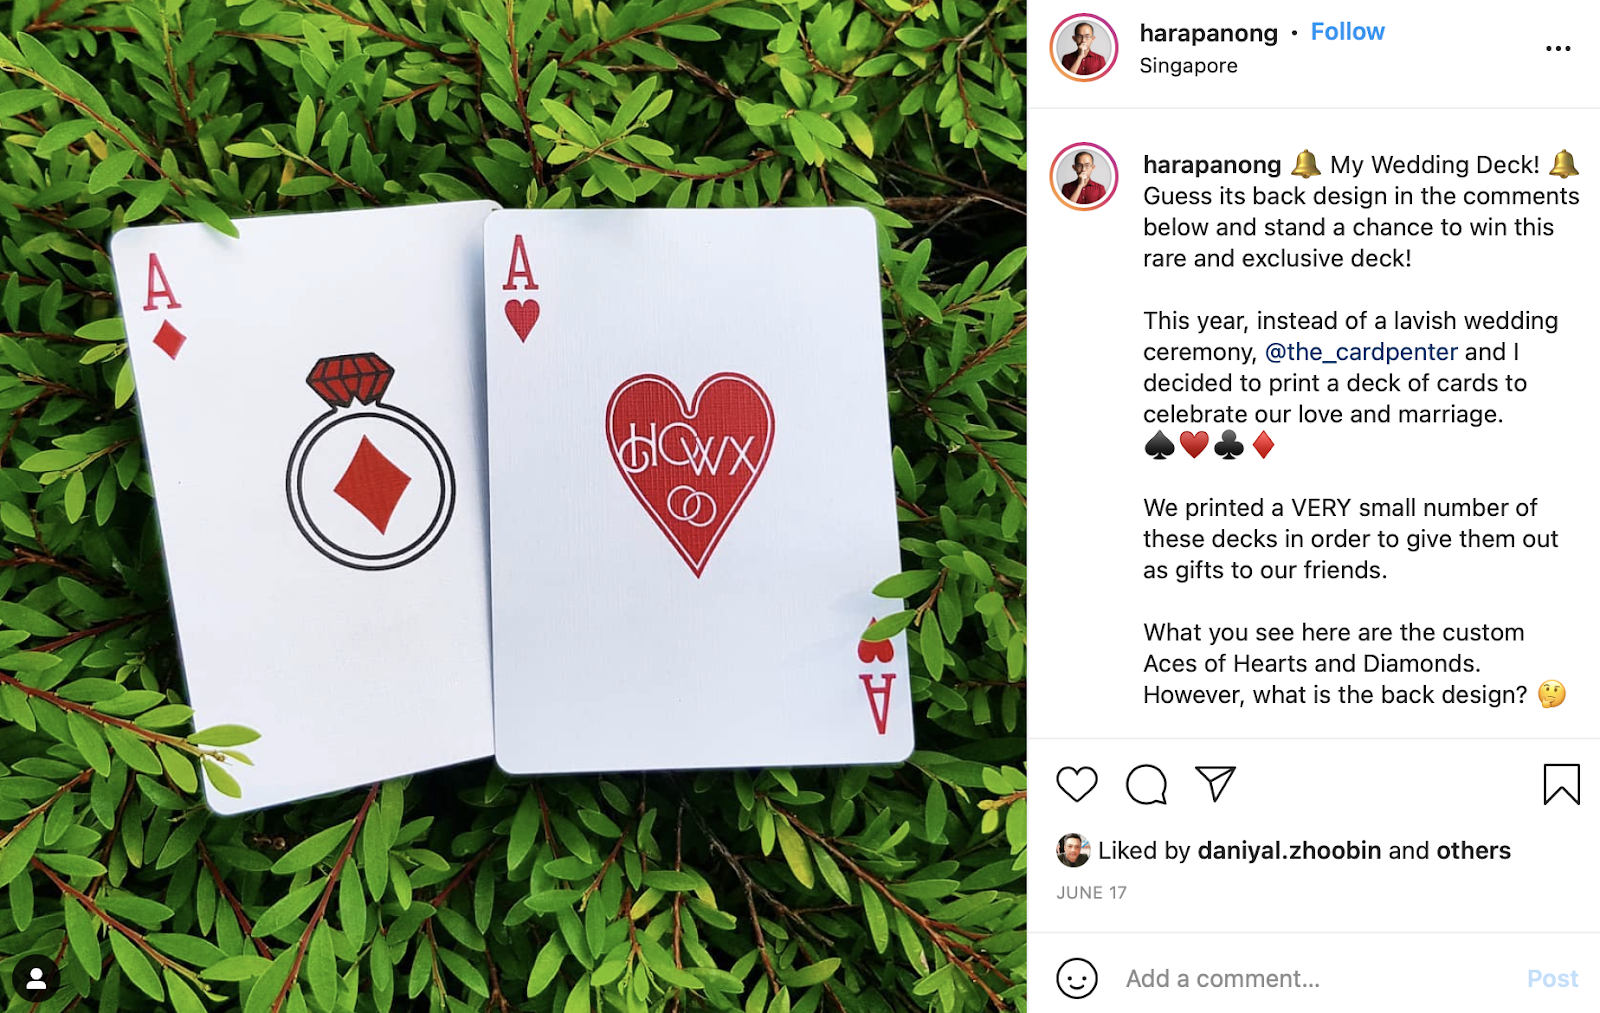 unique wedding gift idea: customized deck of cards